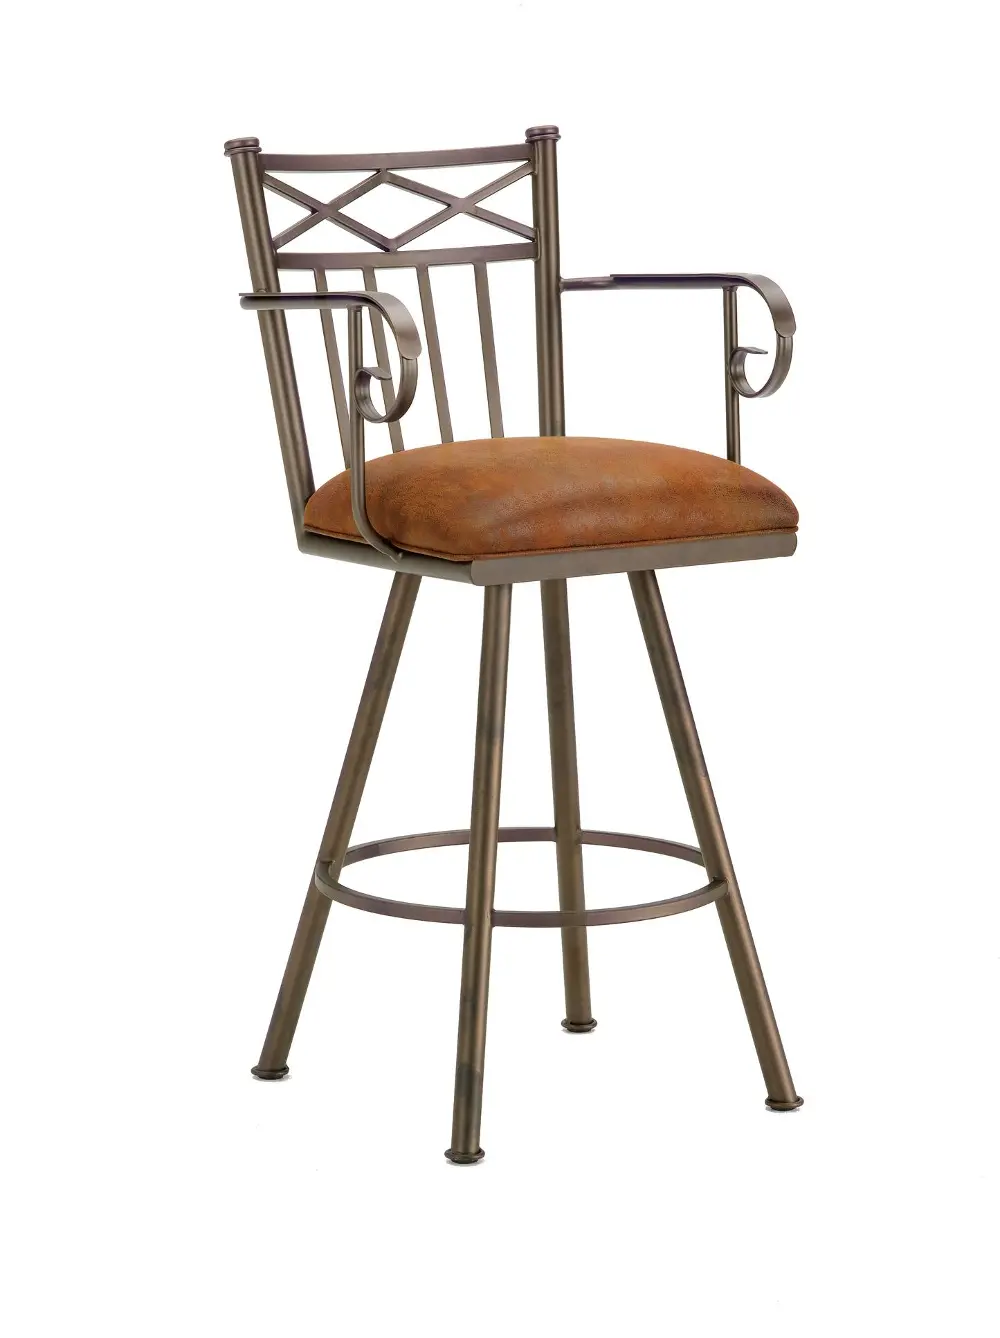 Brown and Bronze Metal Swivel Bar Stool with Arms - Alexander-1